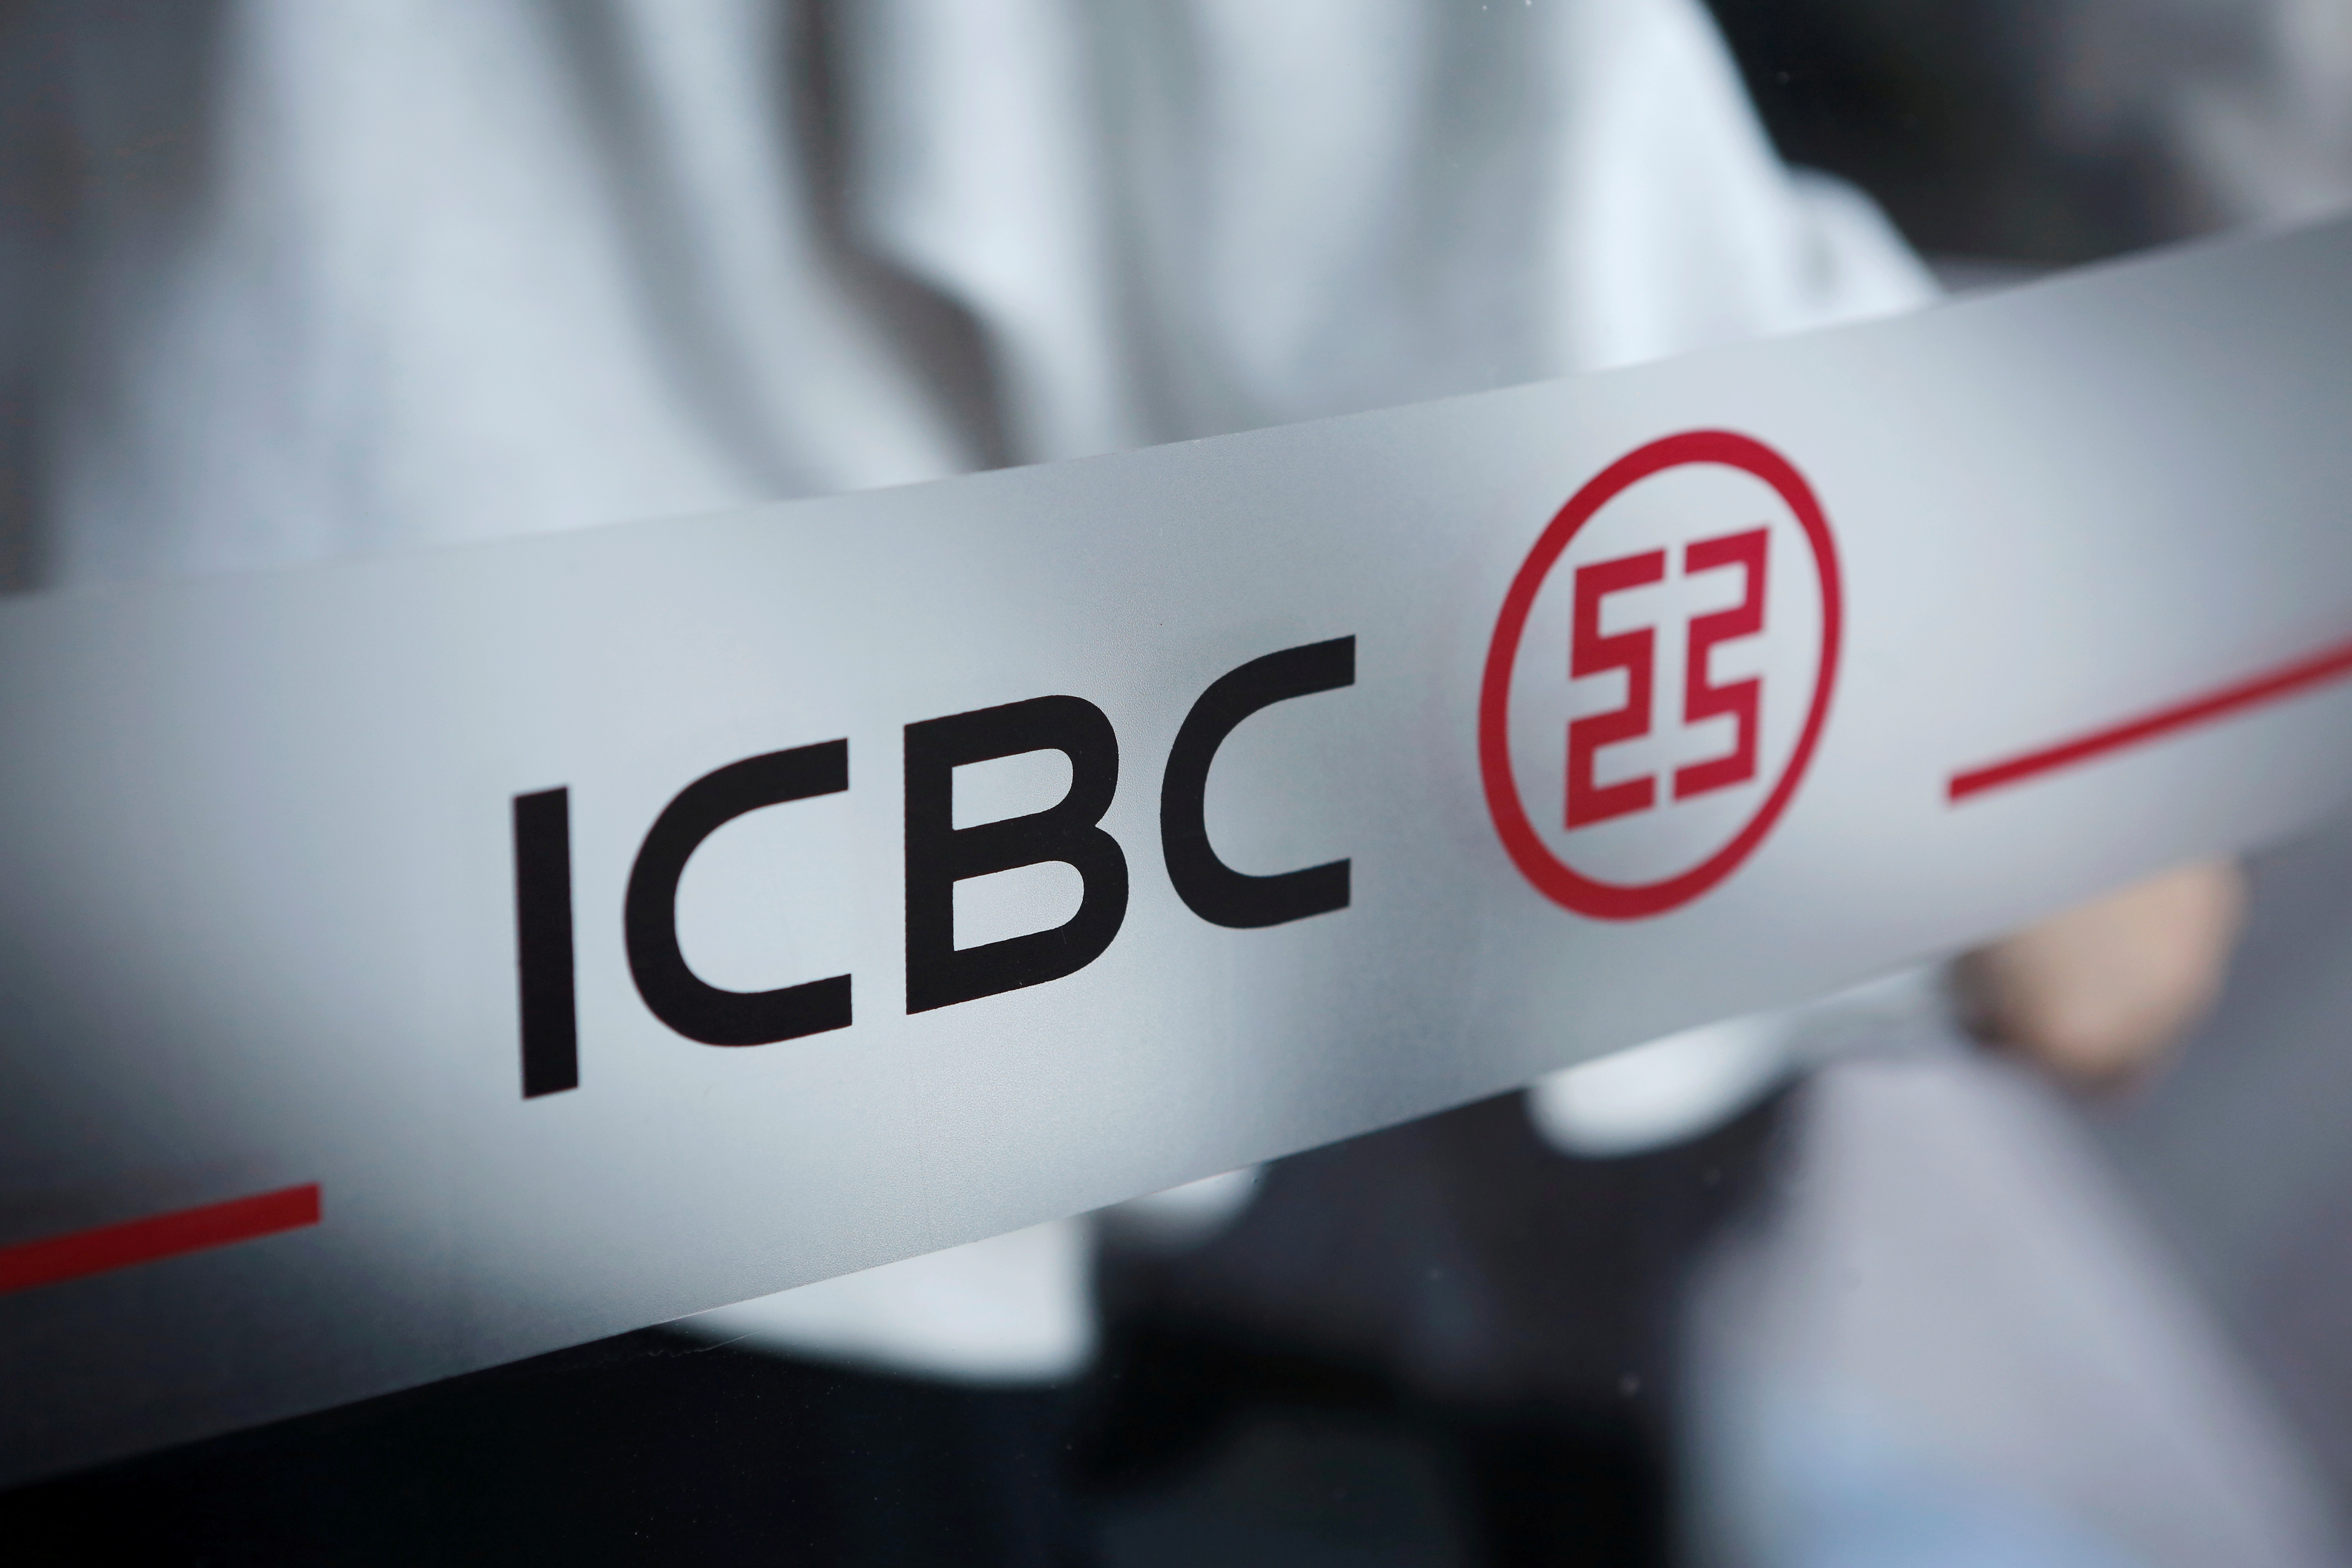 The logo of Industrial and Commercial Bank of China (ICBC) is pictured at the entrance to its branch in Beijing